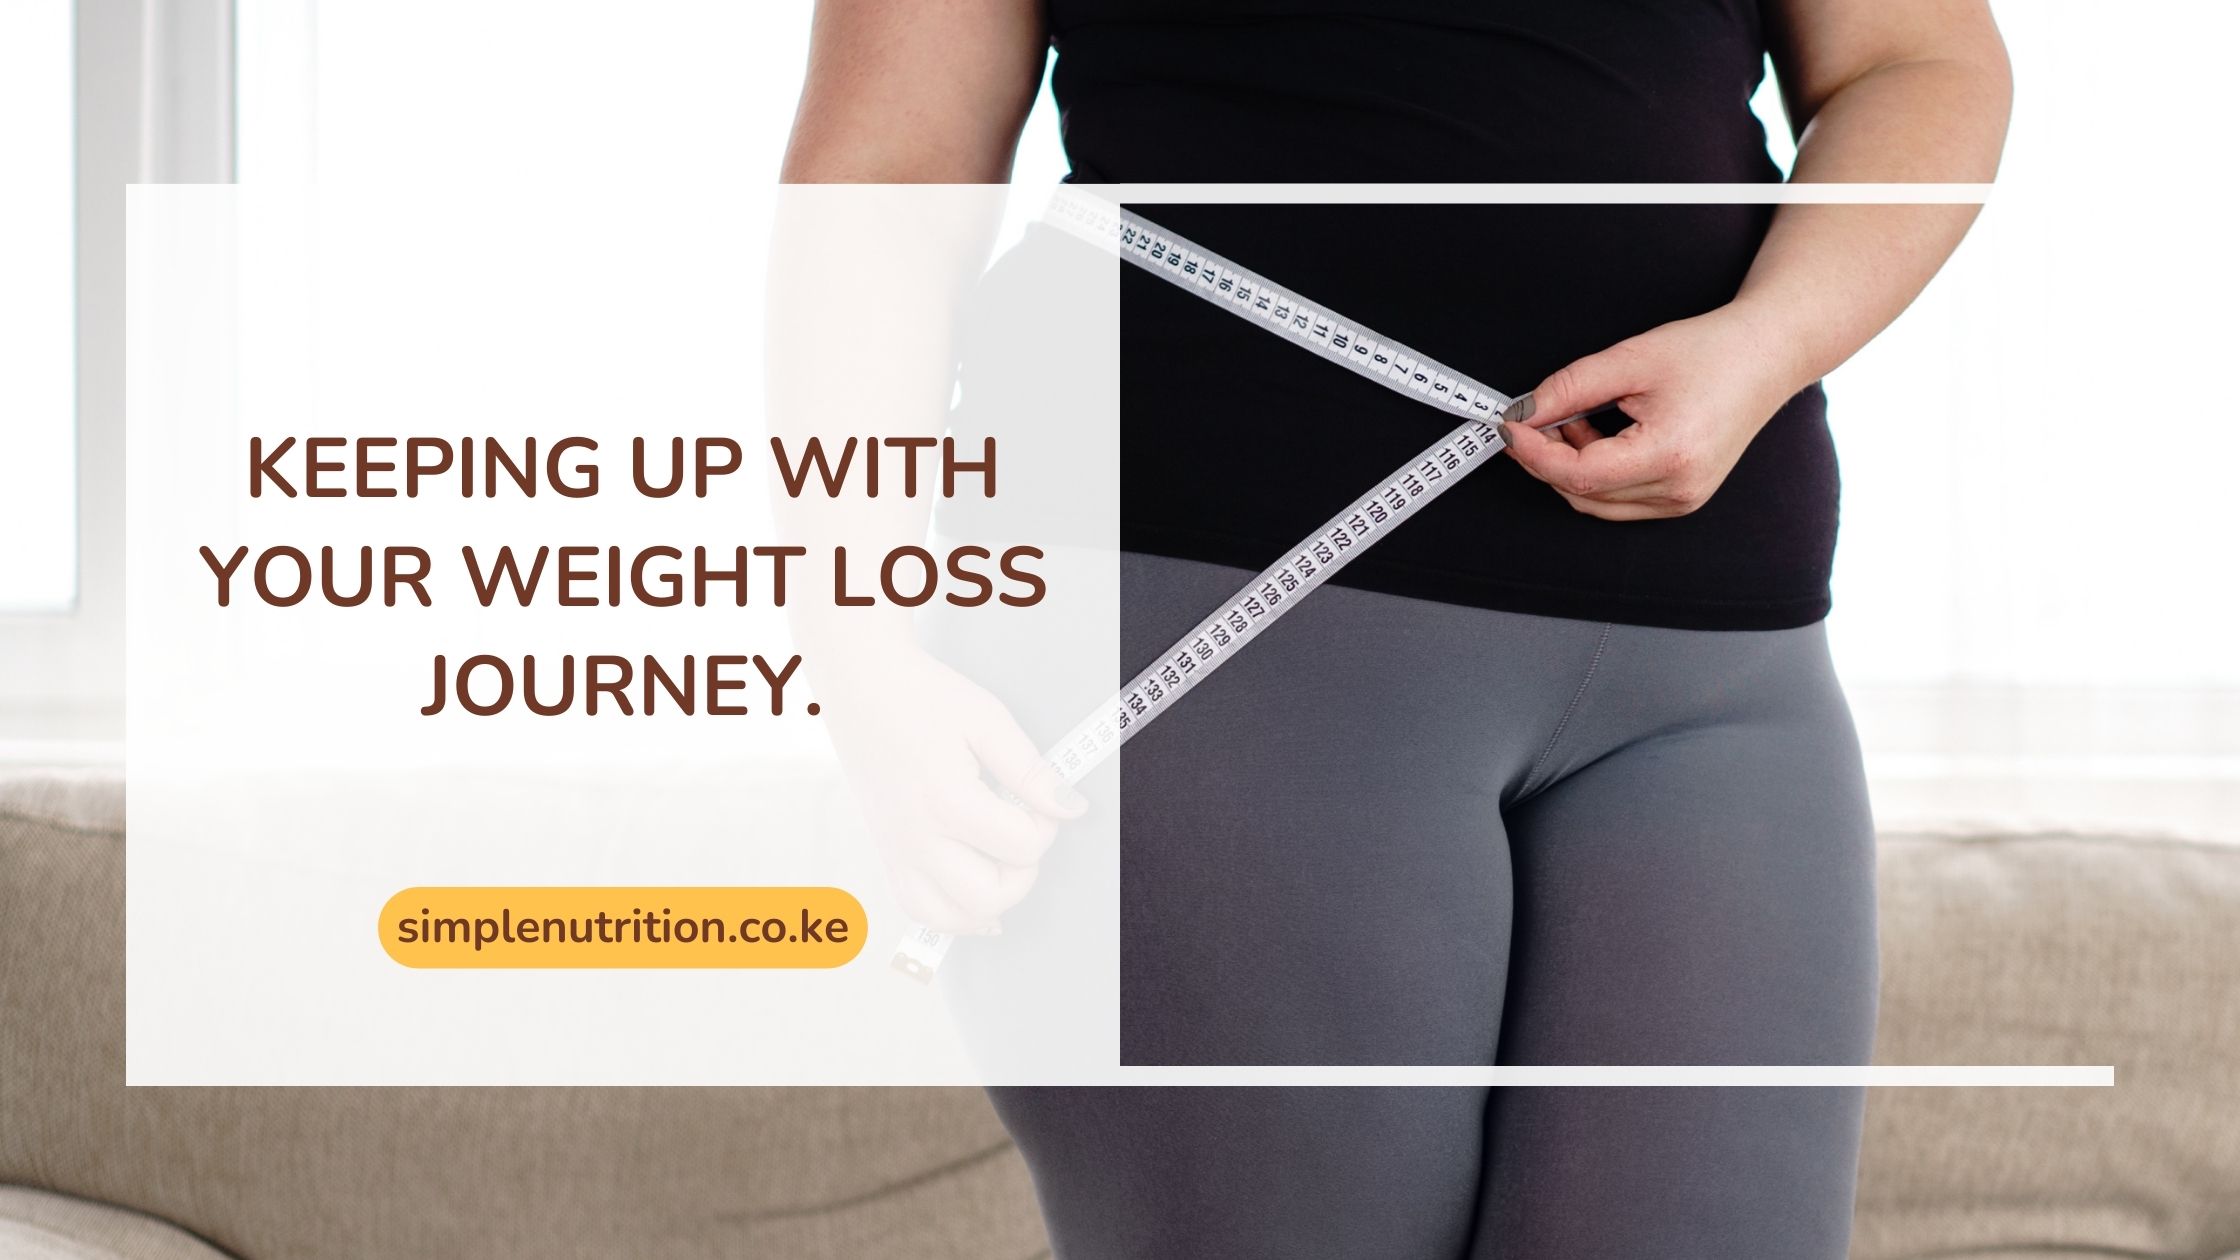 Strategies to cope up with weight loss, How not to give up!